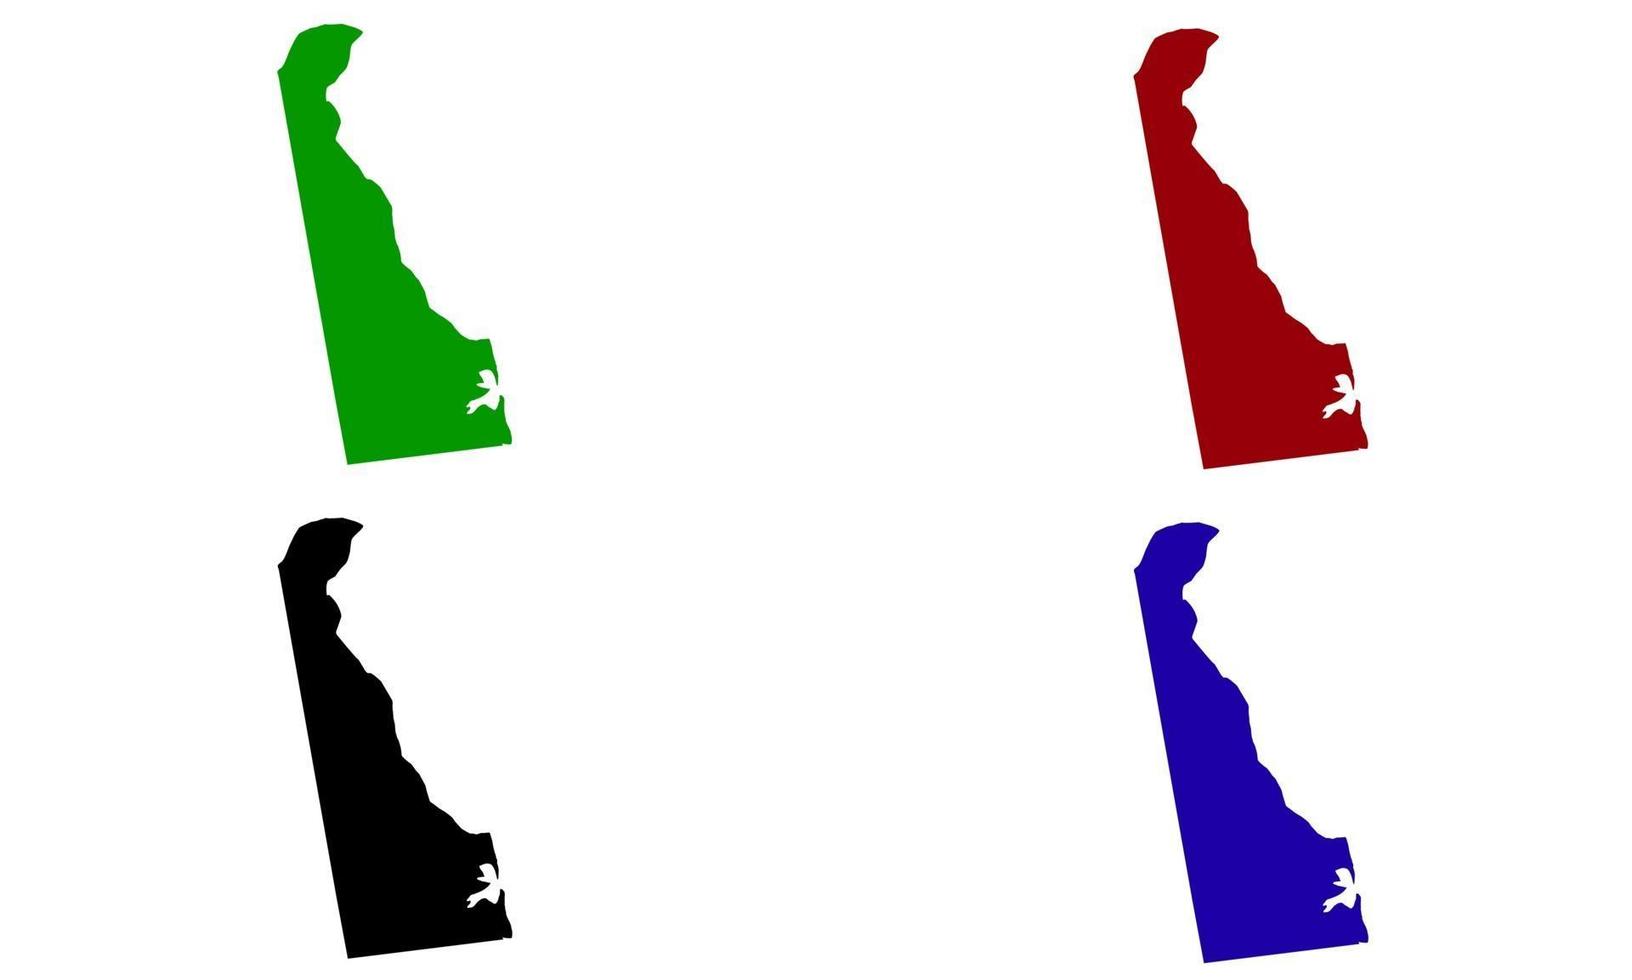 silhouette map of the states of Delaware in the united states vector